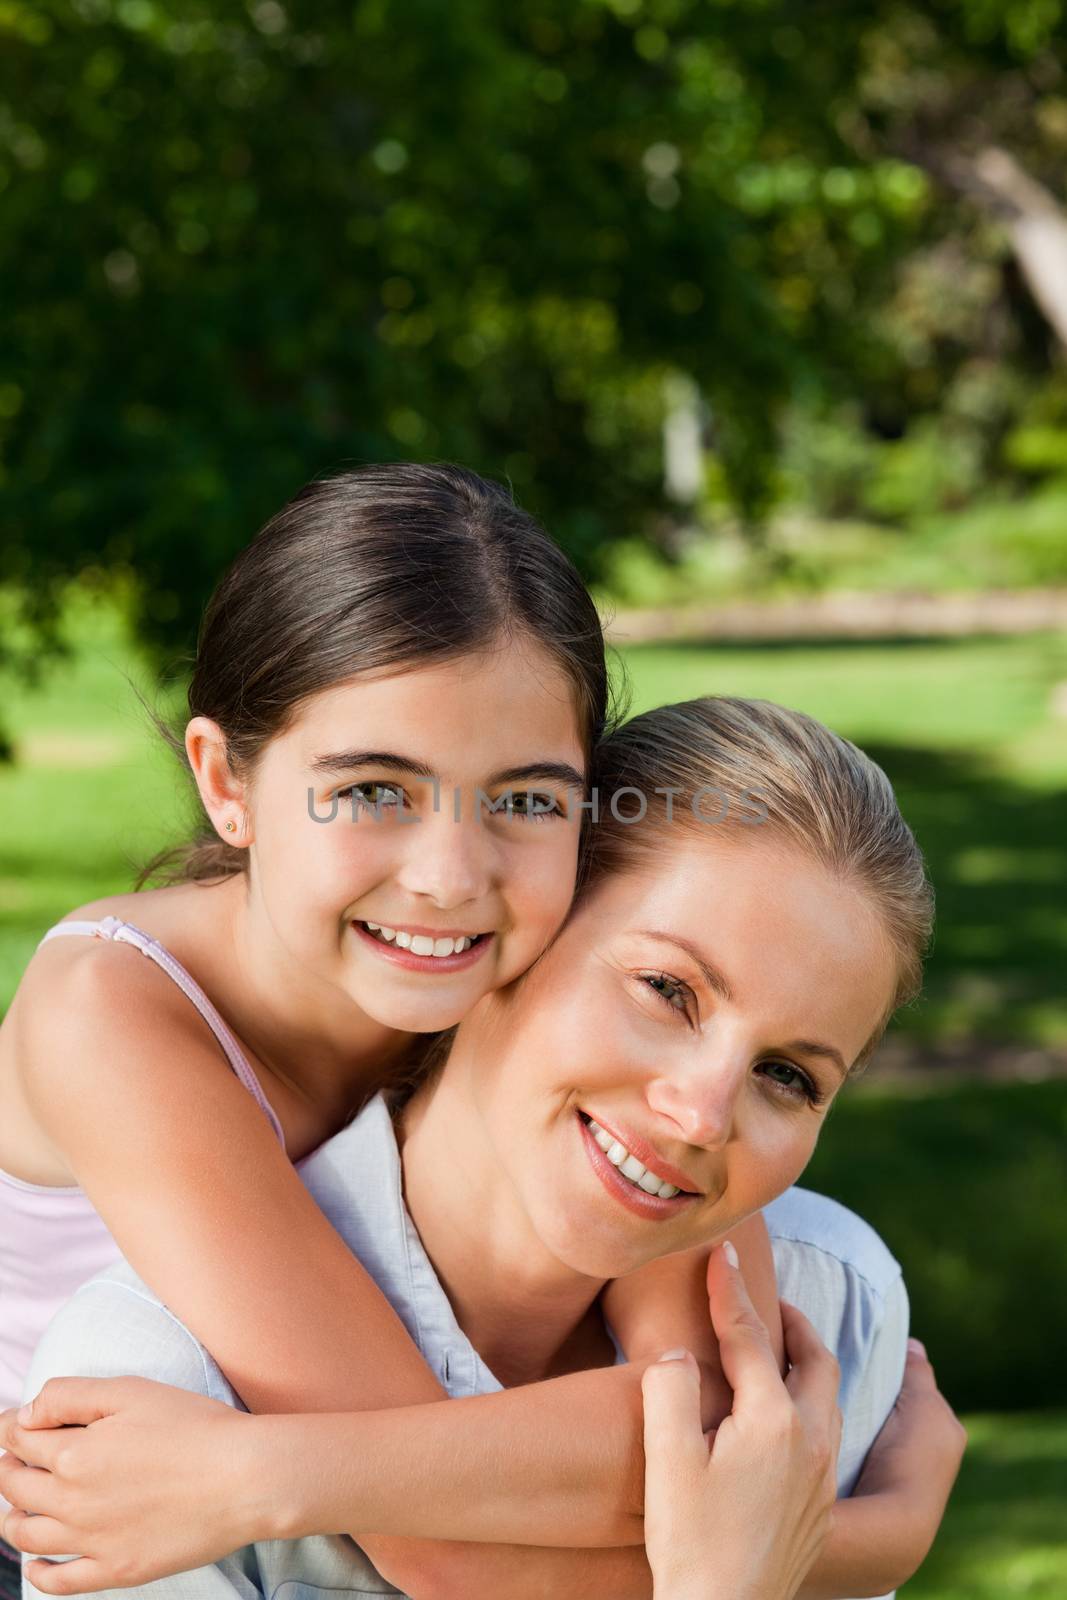 Cute daughter with her mother in the park during the summer